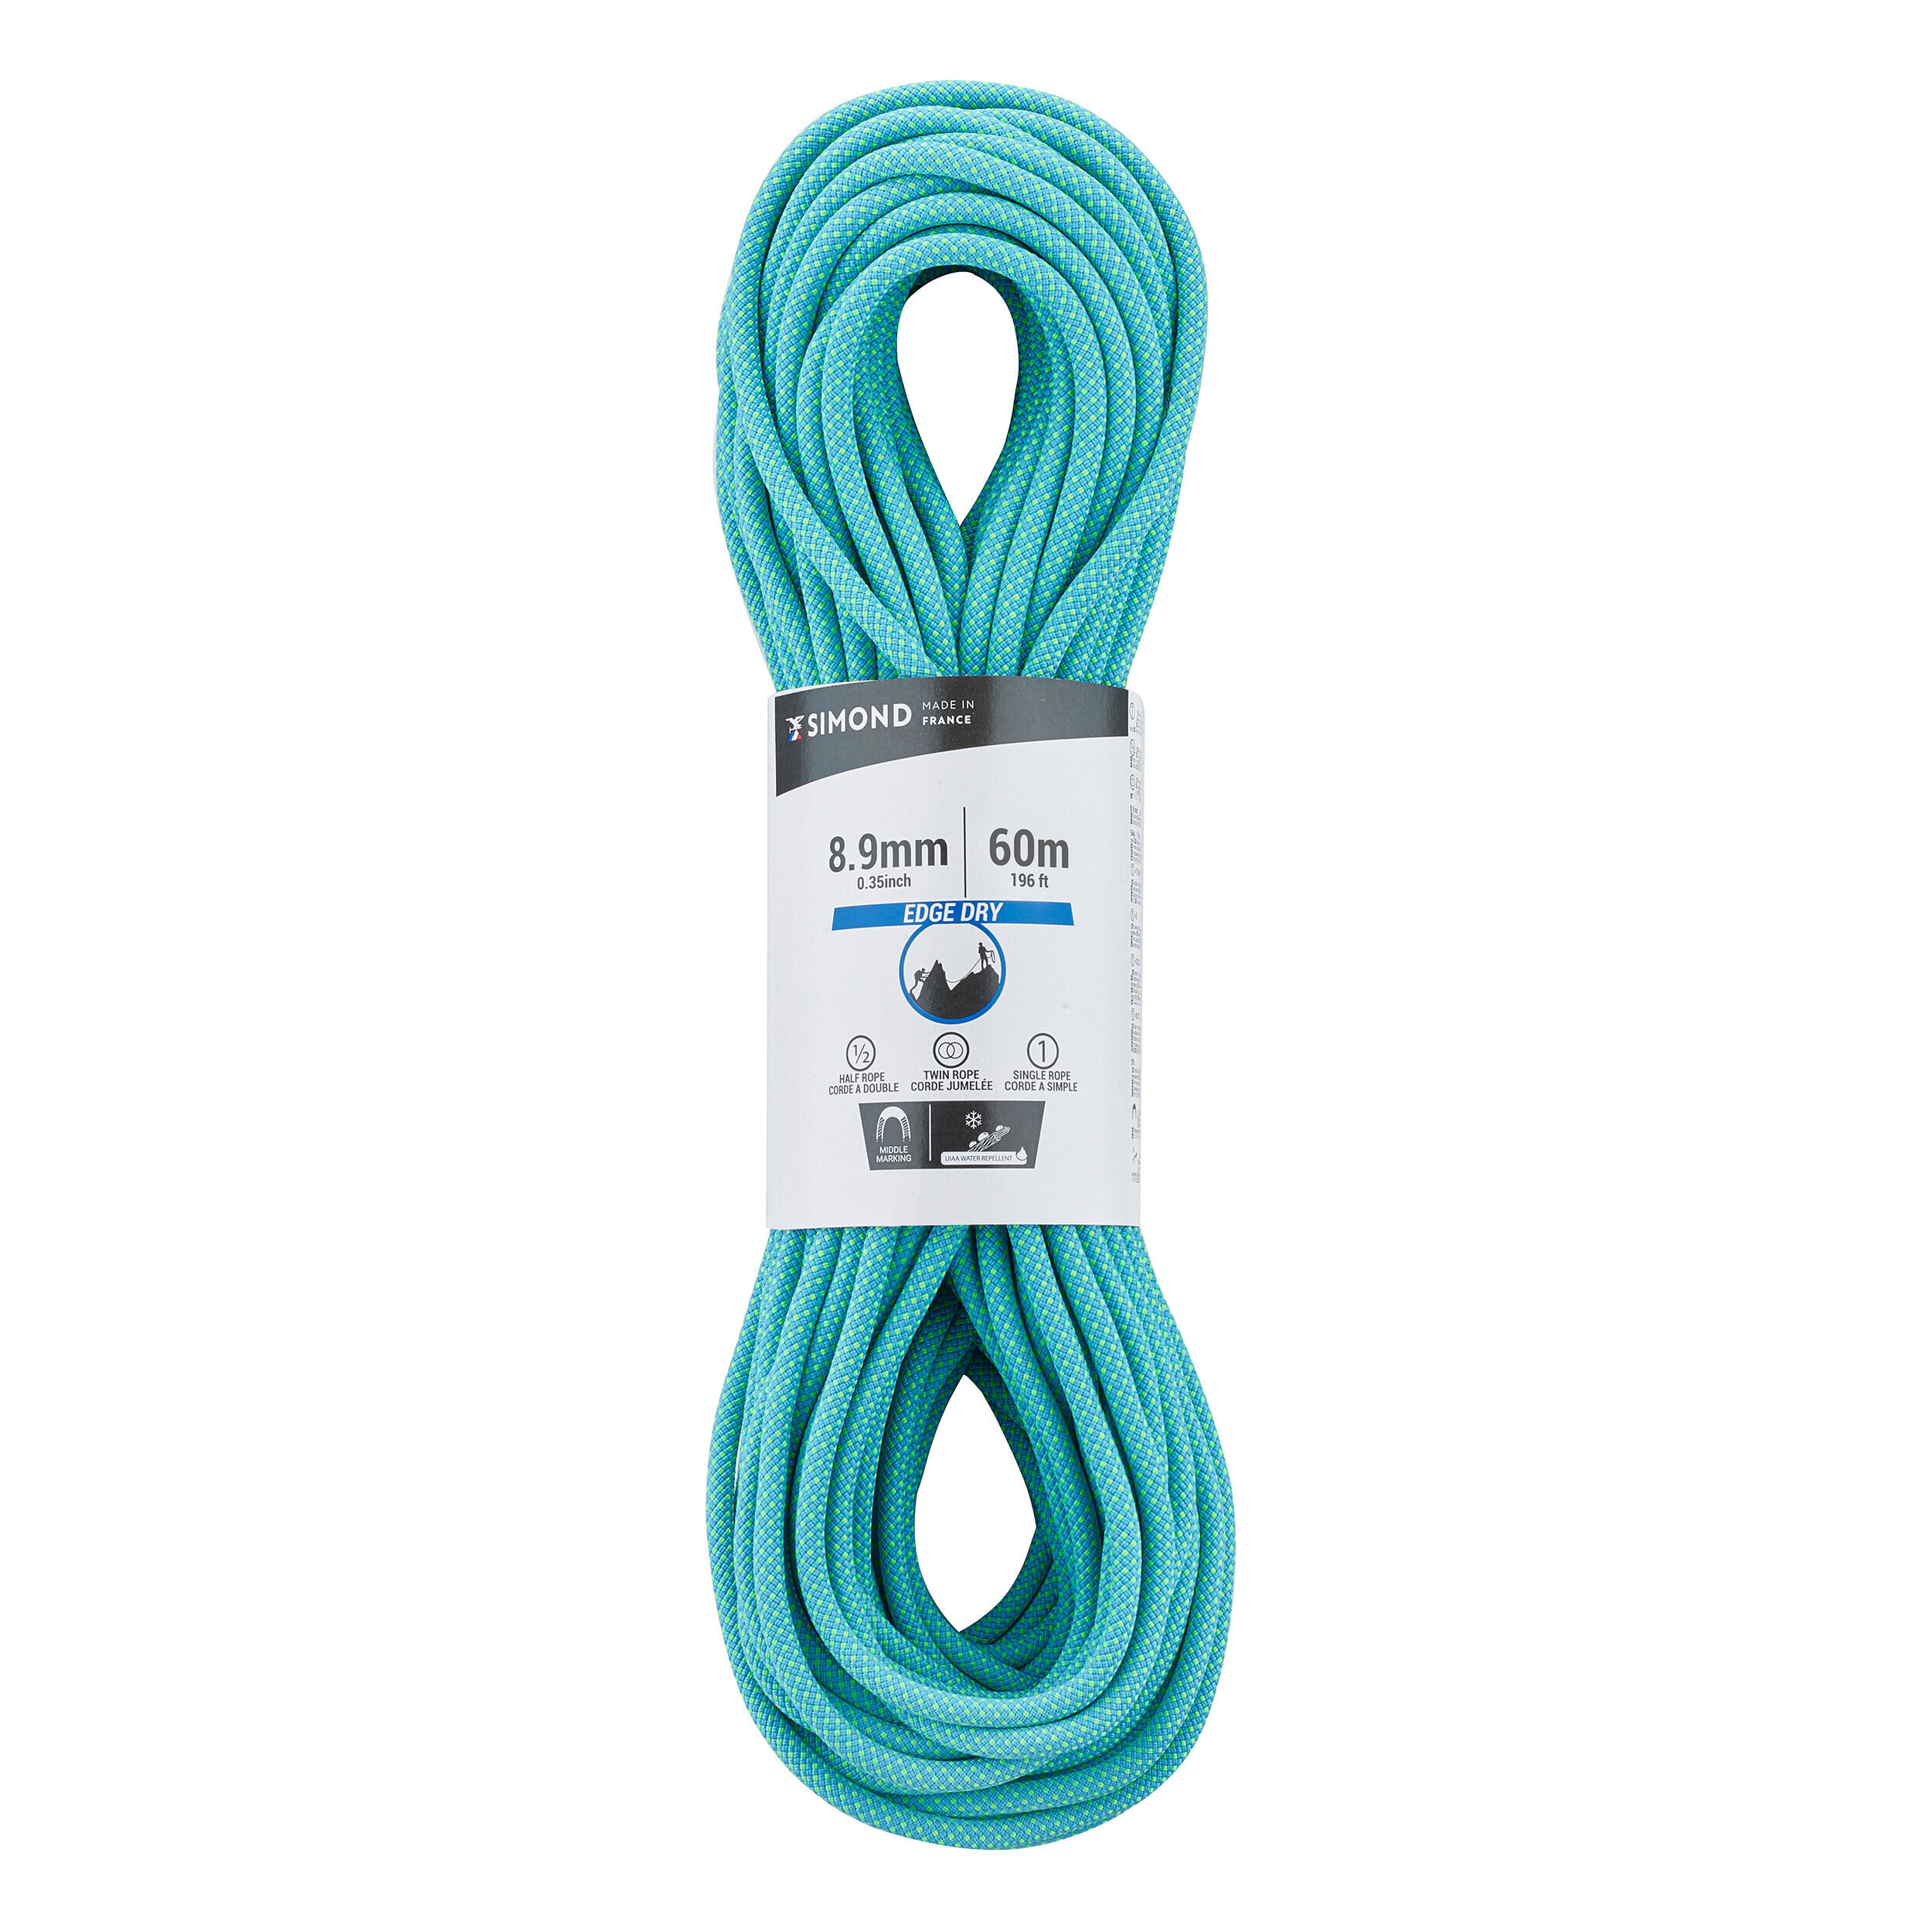 SIMOND CLIMBING AND MOUNTAINEERING TRIPLE ROPE STANDARD 8.9 mm x 60 m - EDGE DRY TURQUOISE